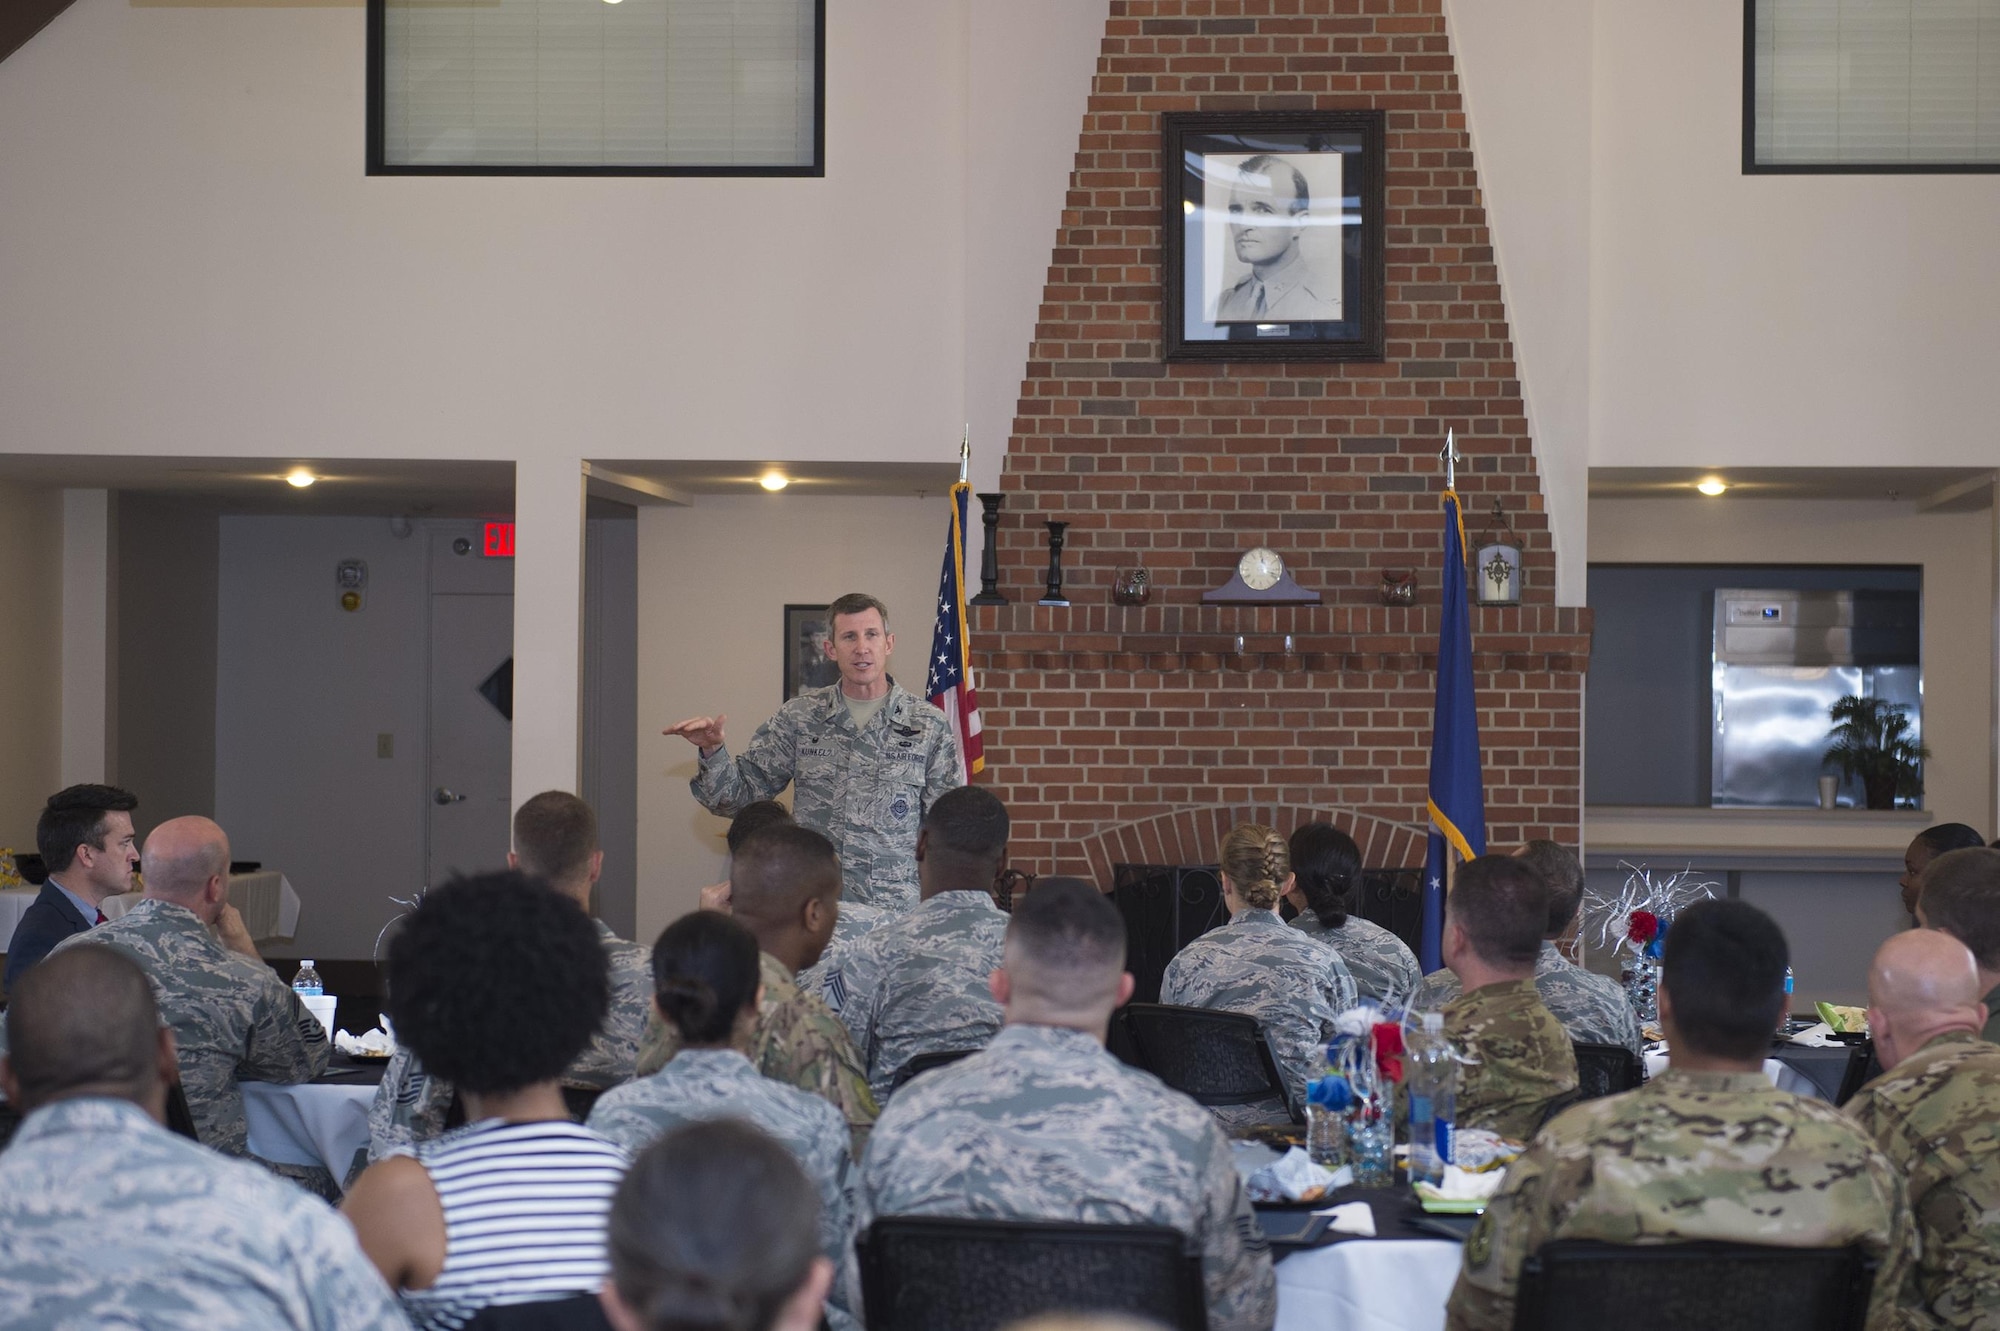 Col. Thomas Kunkel, 23d Wing commander, commends the students of the 2017 Emerge Moody, Leadership Moody classes during a graduation ceremony, June 23, 2017, at Moody Air Force Base, Ga. Kunkel encouraged the graduates to pay it forward and make their experience worth more by passing their newly gained skills to units to invest in themselves and others. During the nine-month program, Emerge Moody students broadened their view of how they fit into the overall Moody and larger Air Force mission, while Leadership Moody students learned local community agencies' best practices and challenges of leaders from non-military perspectives. (U.S. Air Force photo by Senior Airman Greg Nash)